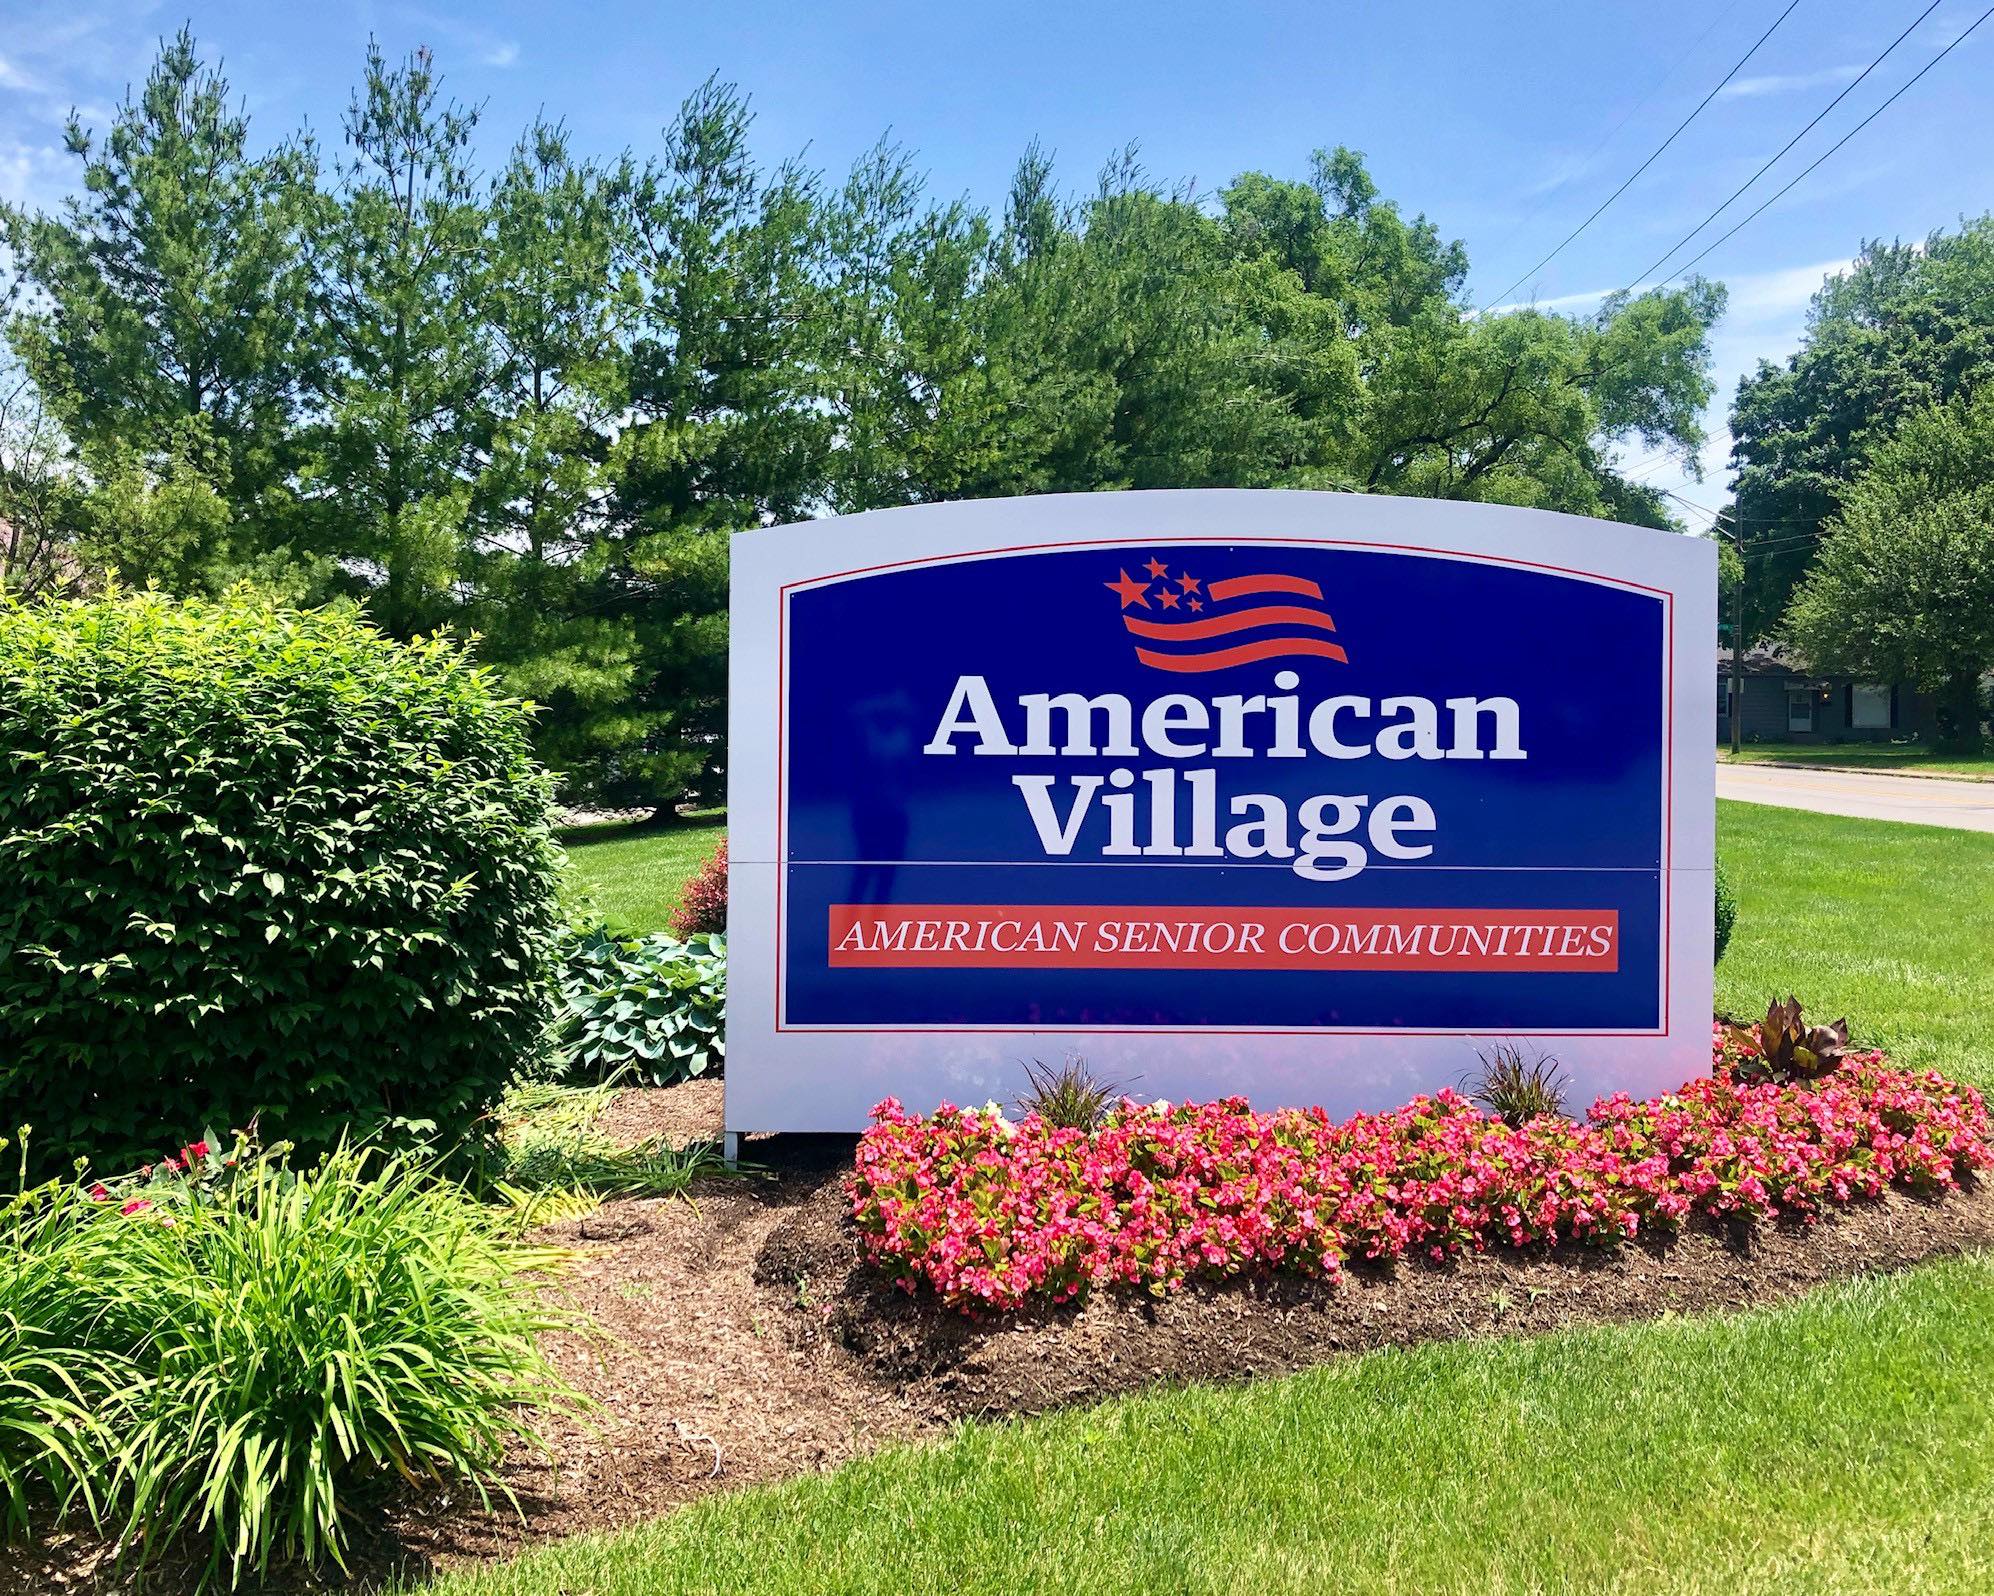 <span  class="uc_style_uc_tiles_grid_image_elementor_uc_items_attribute_title" style="color:#000000;">Exterior entry sign to American Village </span>